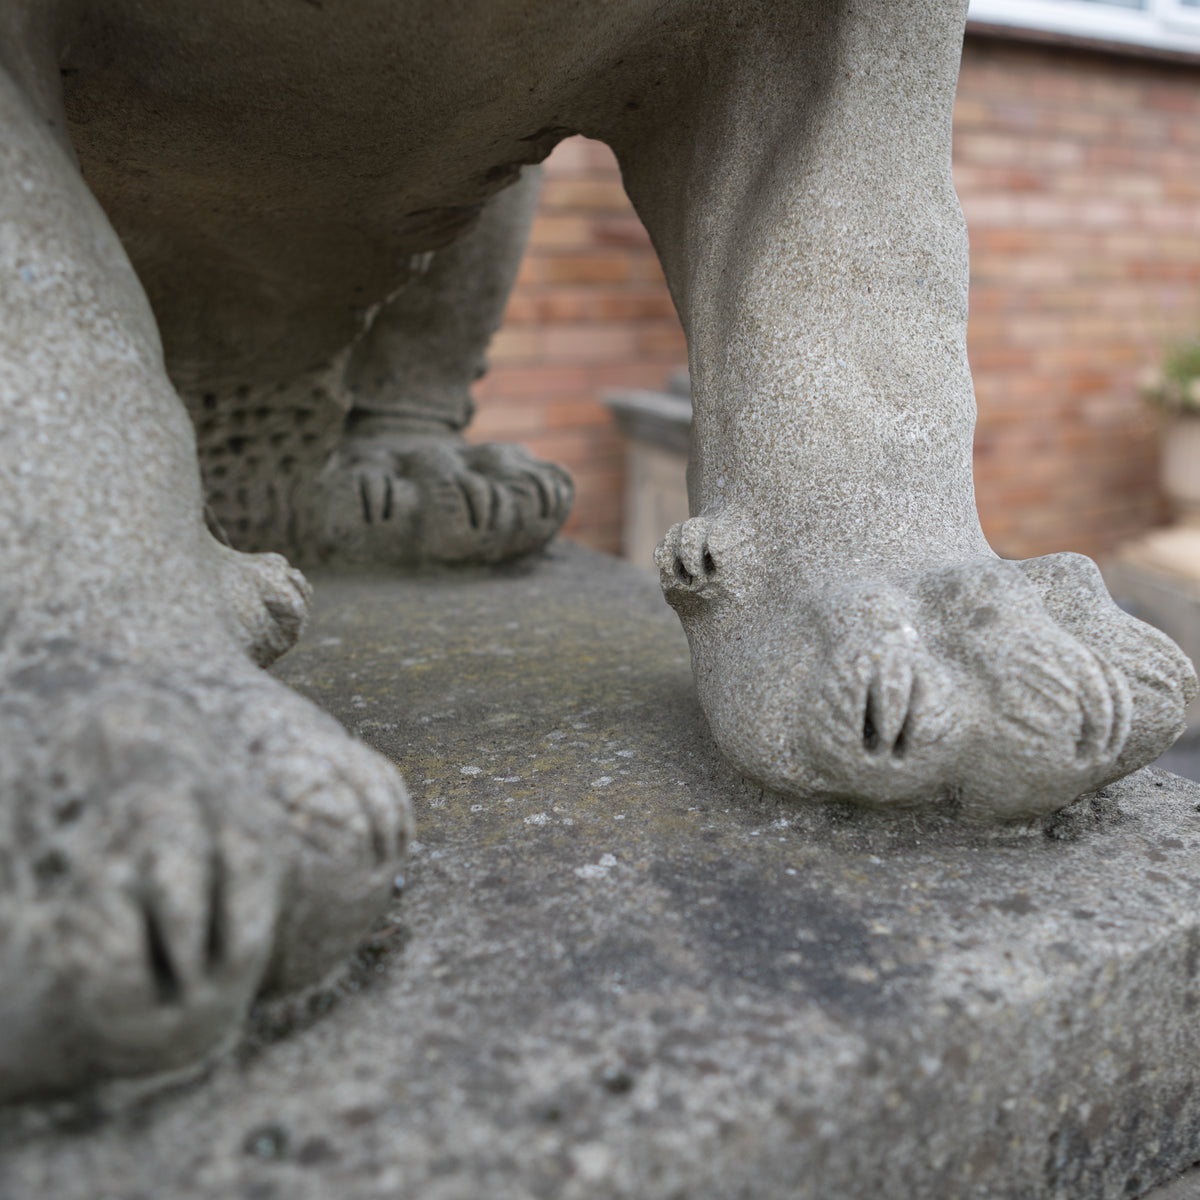 Reclaimed Pair of Monumental Stone Lions on their own Plinth | The Architectural Forum